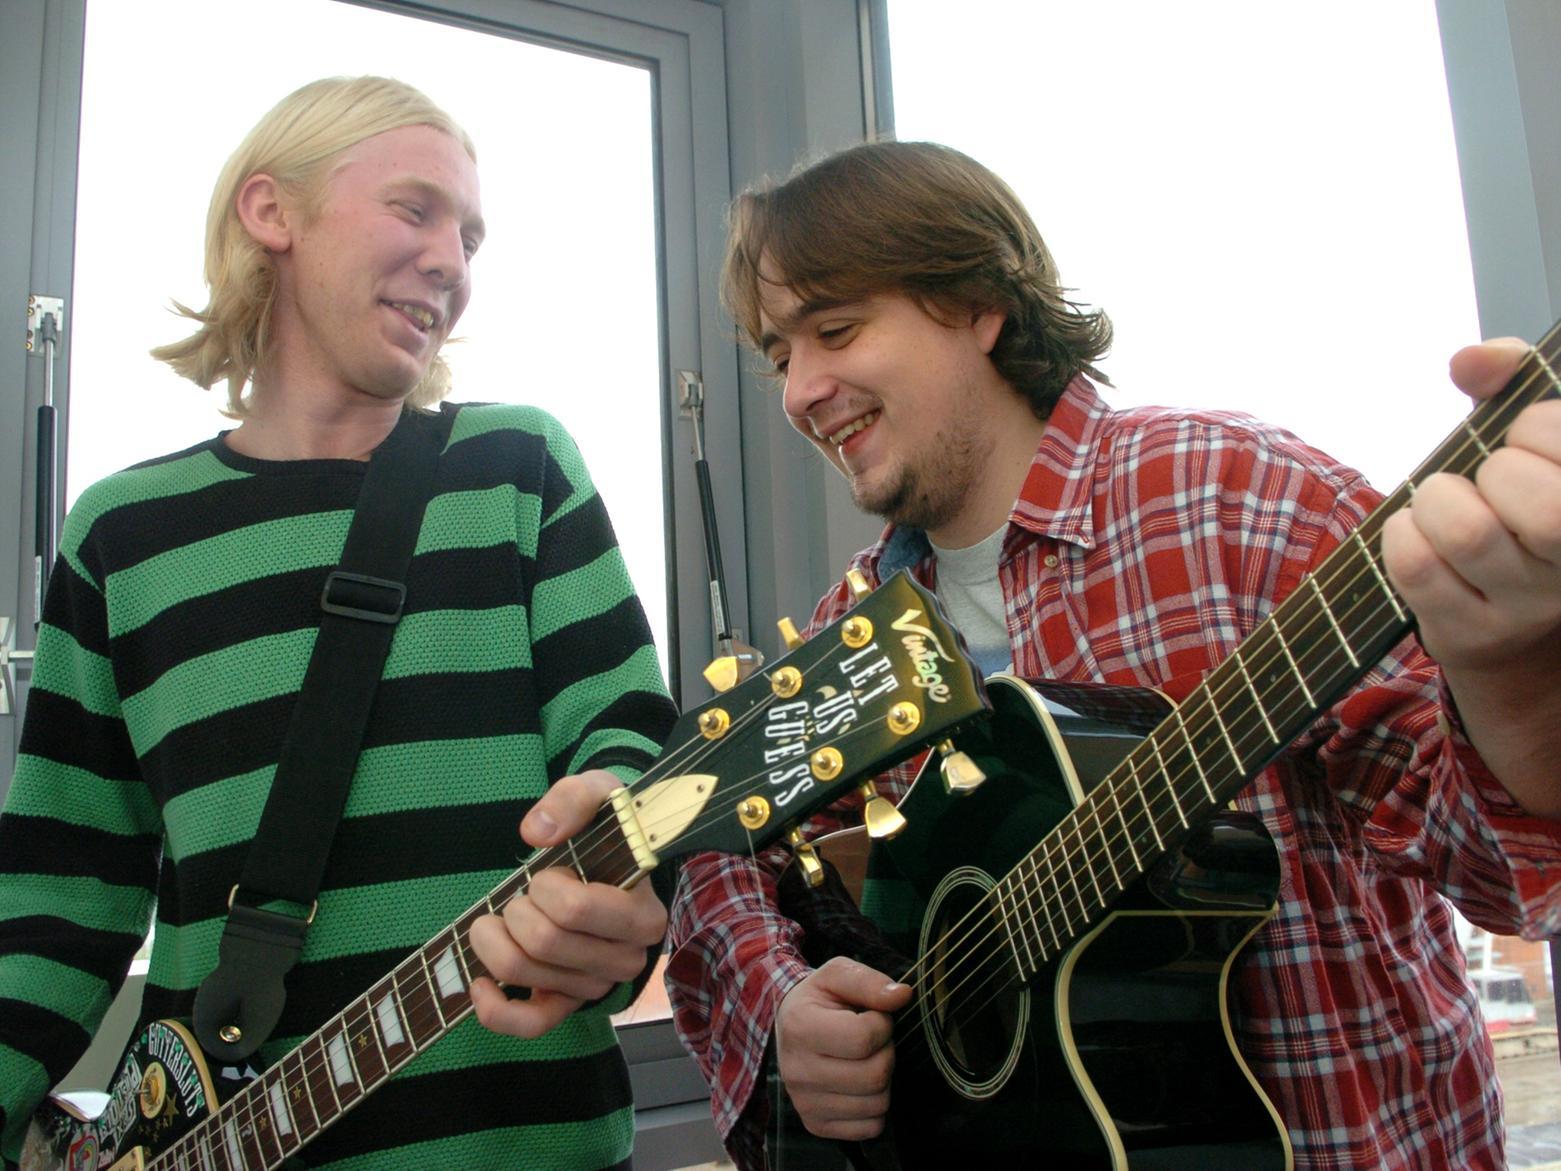 Guitar players from Leeds, Rob Galloway, left, and Stephen Cavadino, who raised money for Half and Half.